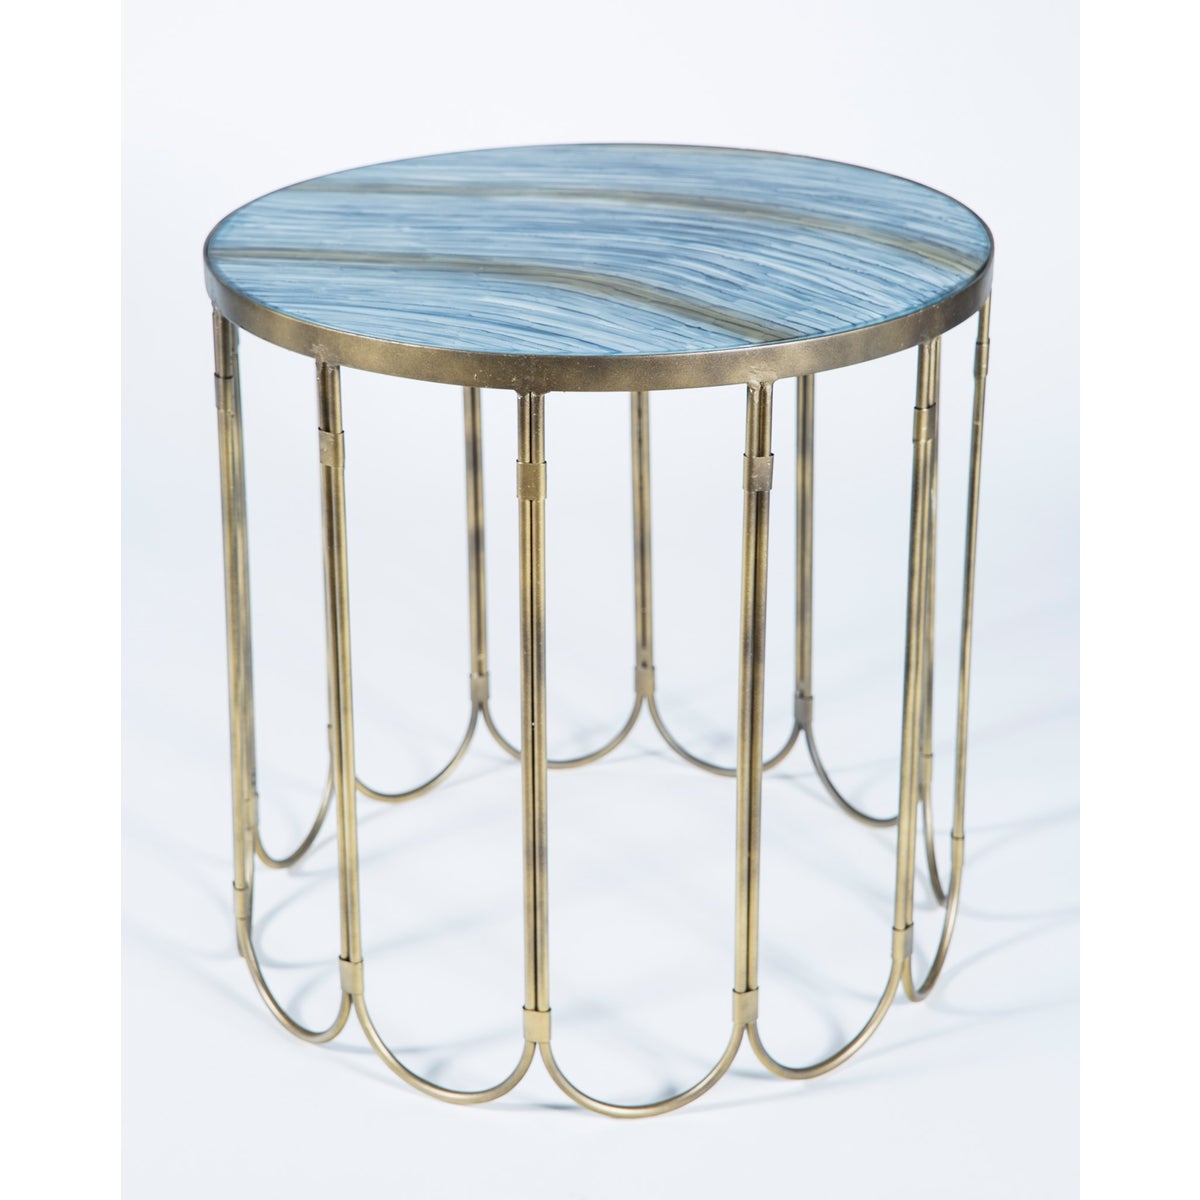 Looped Side Table in Antique Brass with Top in Cheers Finish